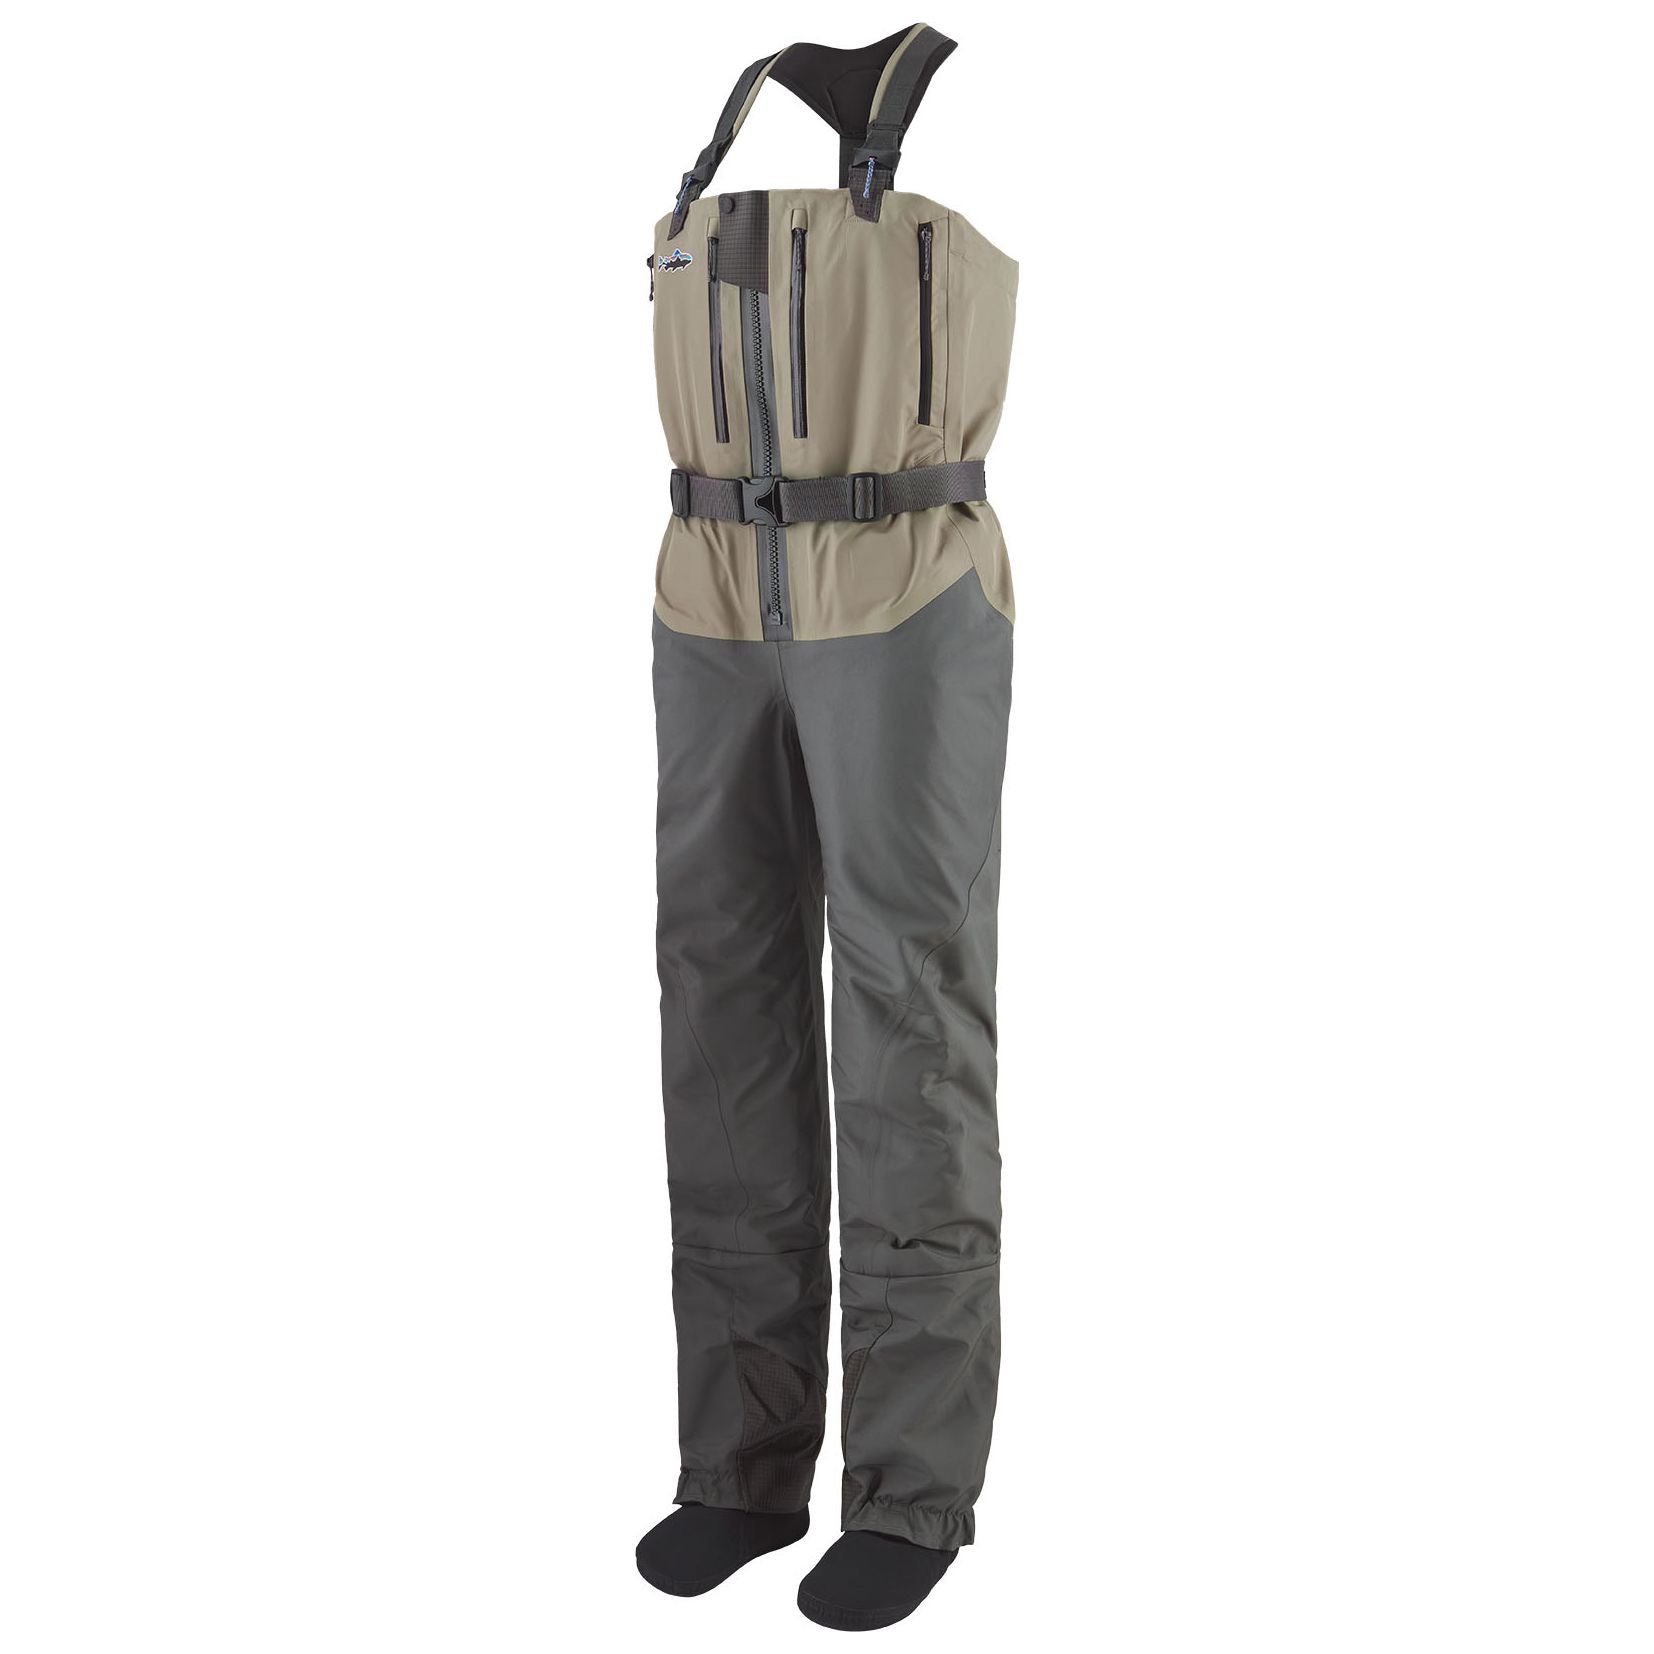 Patagonia Women's Swiftcurrent Expedition Zip - Front Waders River Rock Green Image 01